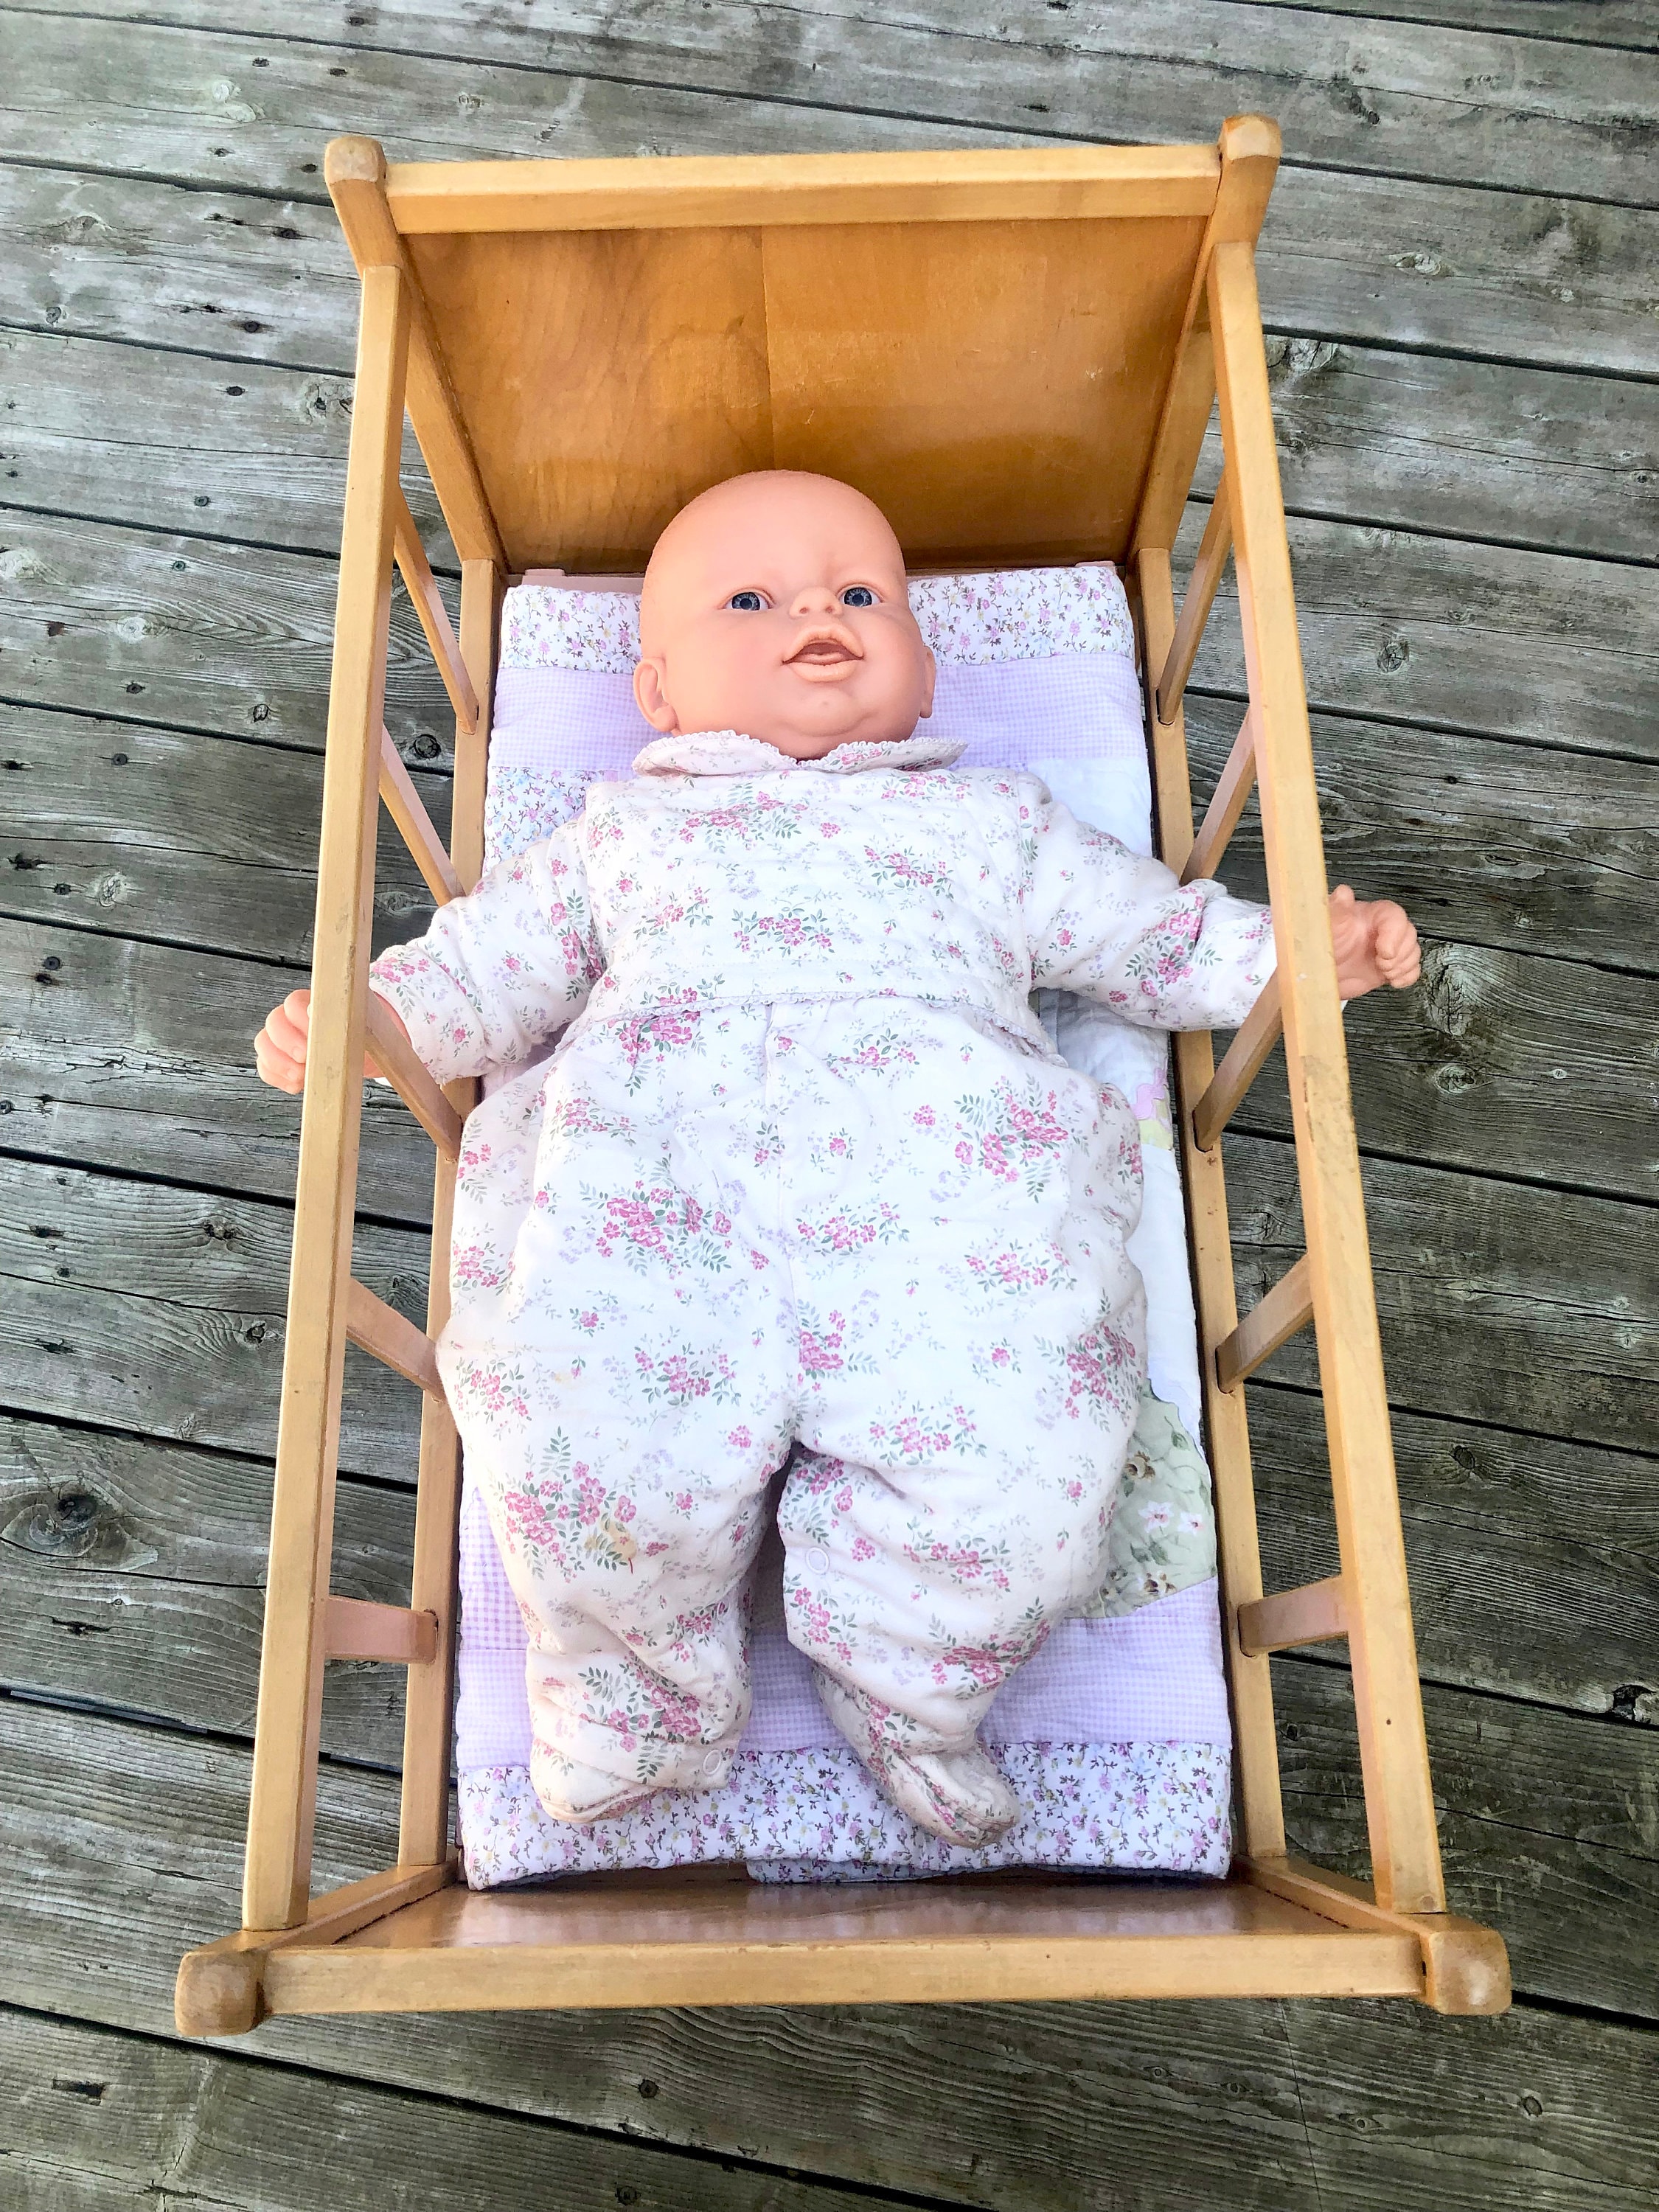 Vintage Baby Cradle Wood Rocking Child Furniture Wooden Cottage Chic  Farmhouse Nursery Decor Decorative Retro Prop Gift for Favorite Doll -   Finland